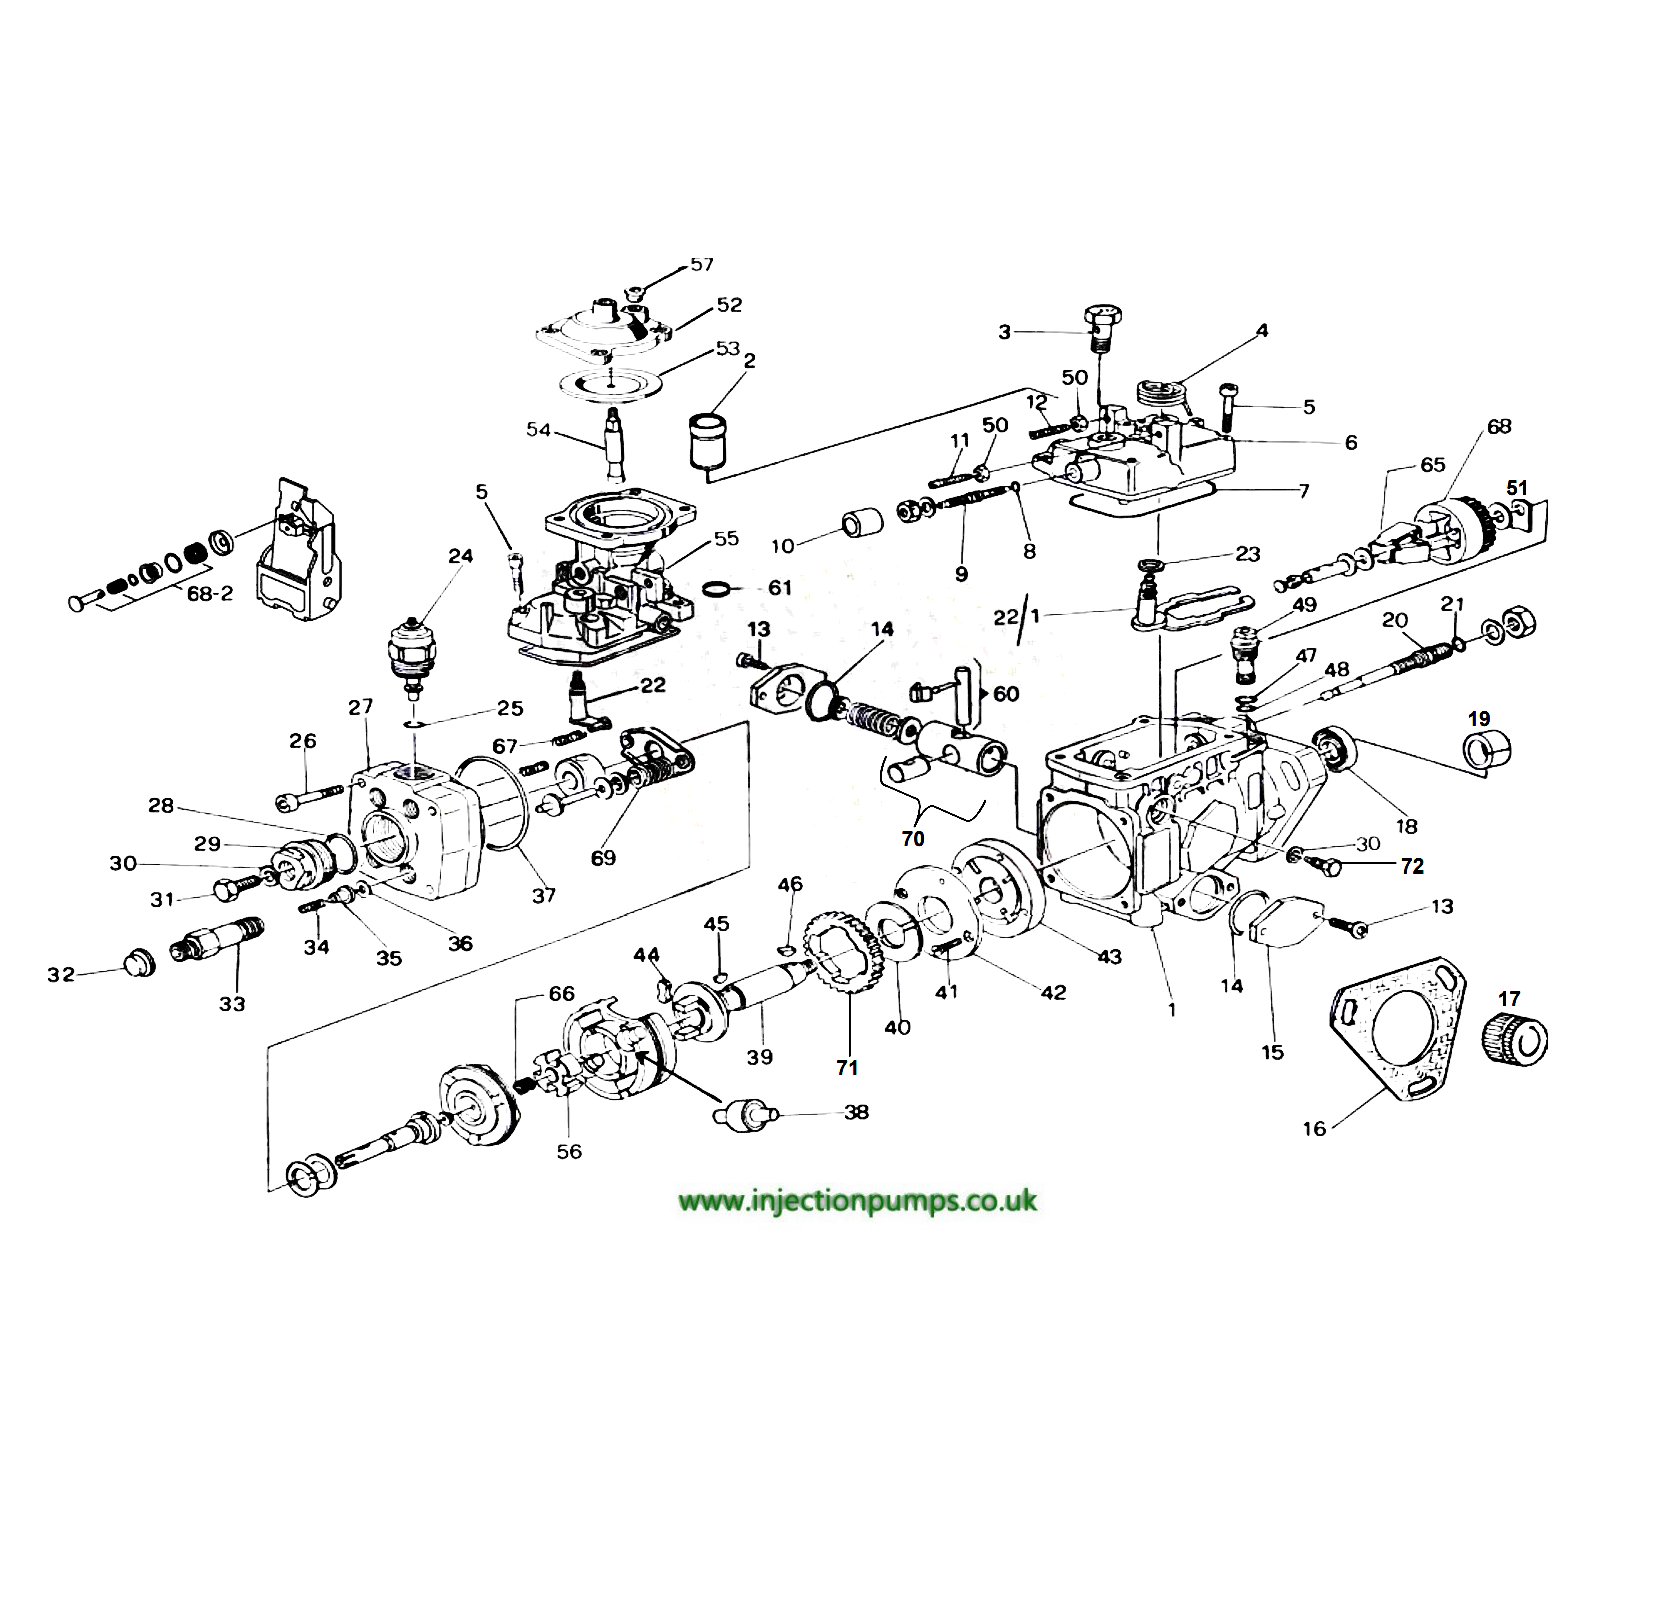 Bosch Cp3 Fuel Injection Pump Service Manual